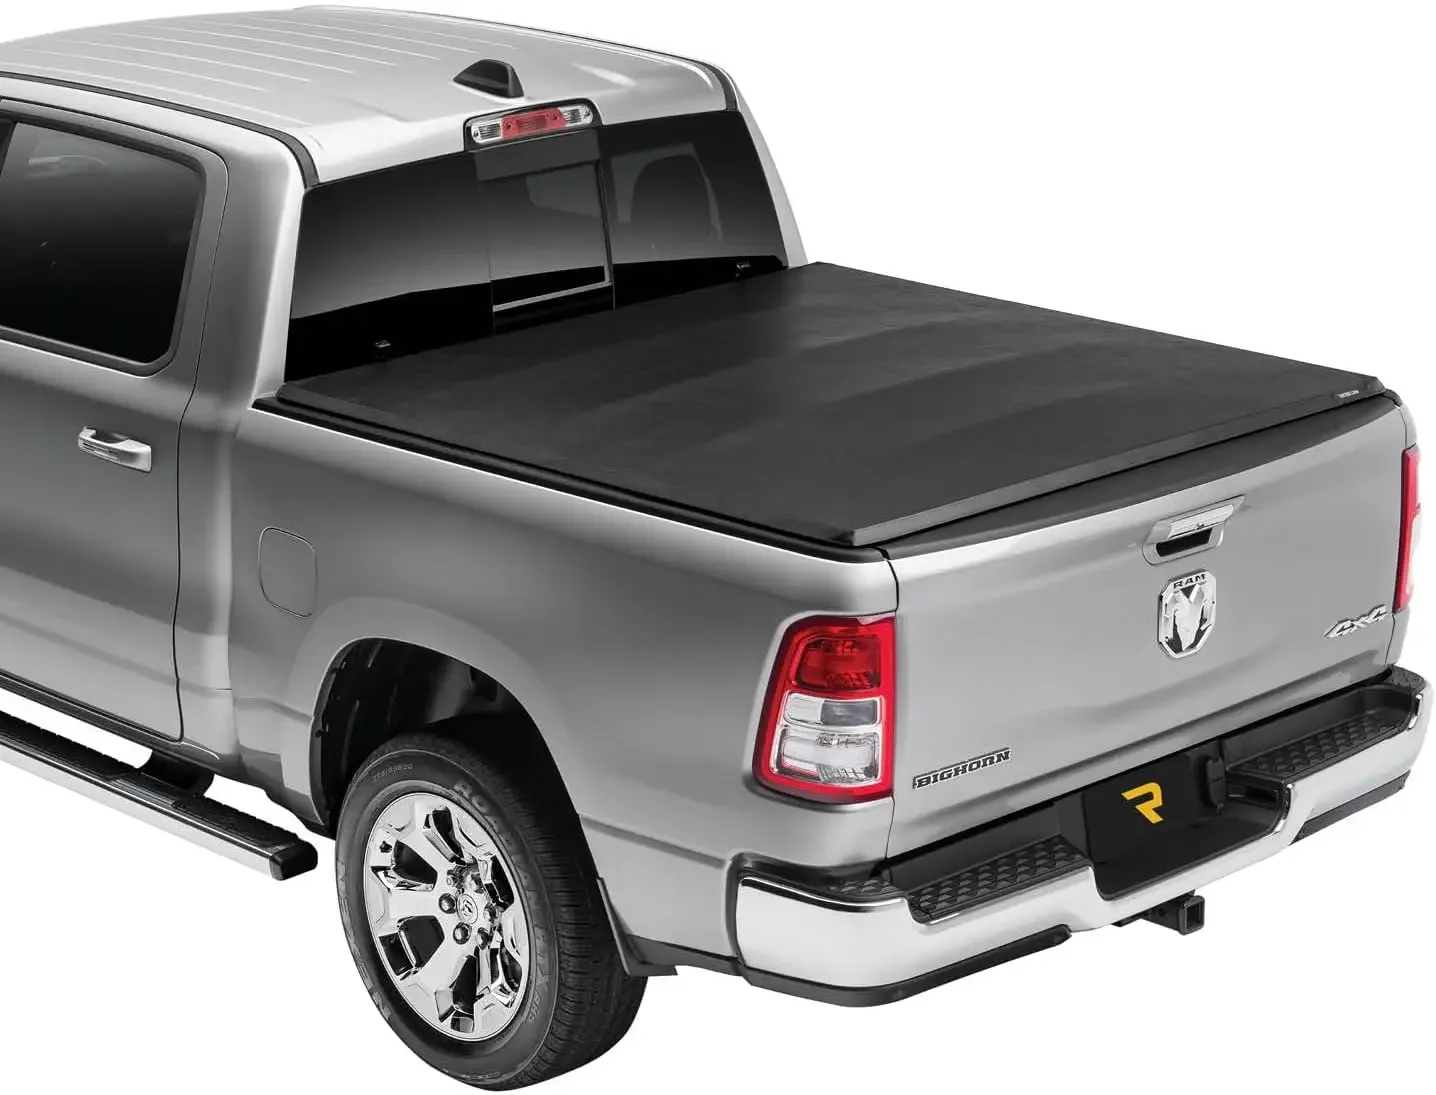 

Soft Tri-Fold Truck Bed Tonneau Cover | 59421 | Fits 2019 - 2023 Dodge Ram w/o multifunction (split) tailgate 5' 7" Bed (67.4")